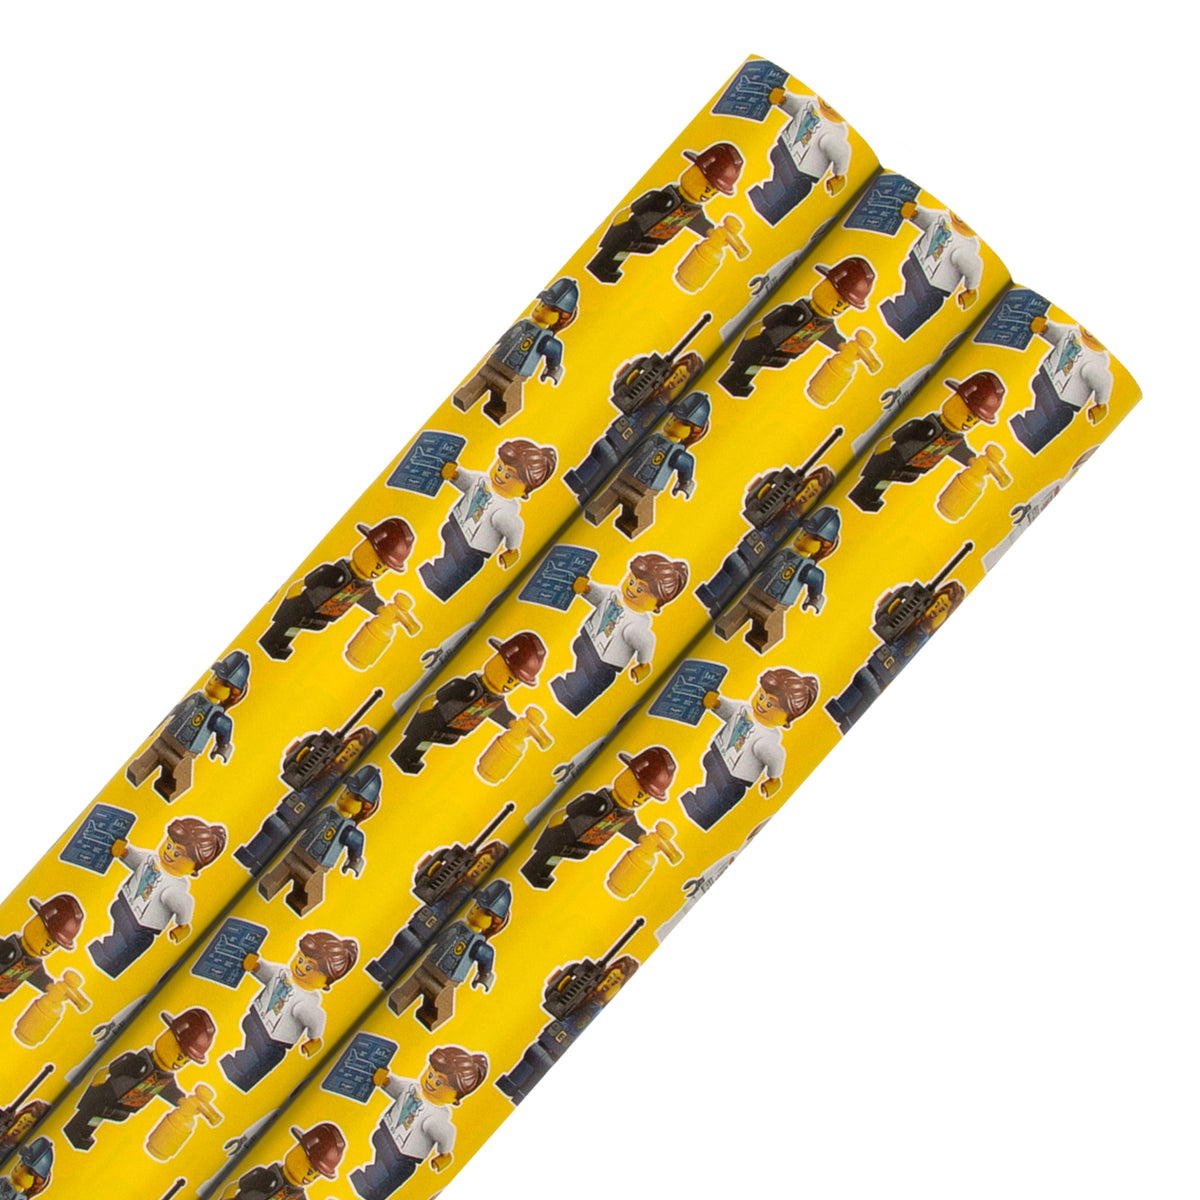 Fkonline Wrapping Sheets Pac of 10 Sheets, Design Lego Theme Lego World,  Size 19 X 27 inch, 49cm x 69cm, Wrapping Paper Sheets for Birthday Gift :  : Home & Kitchen